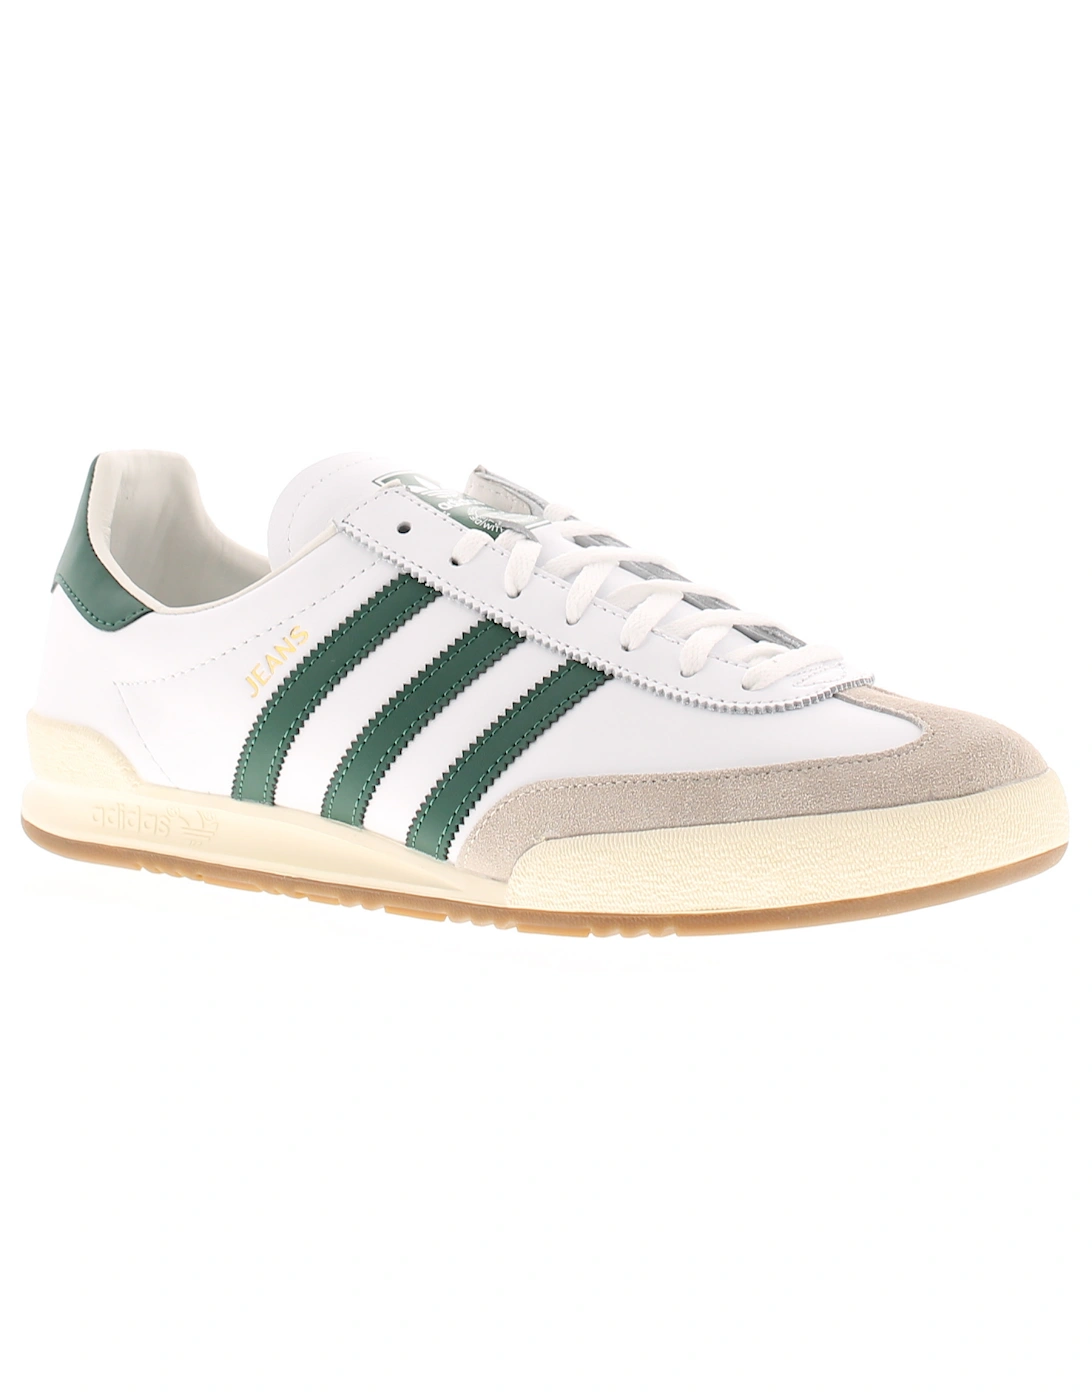 Mens Trainers Lace Up Jeans Leather 3 Stripe White Green UK Siz, 6 of 5